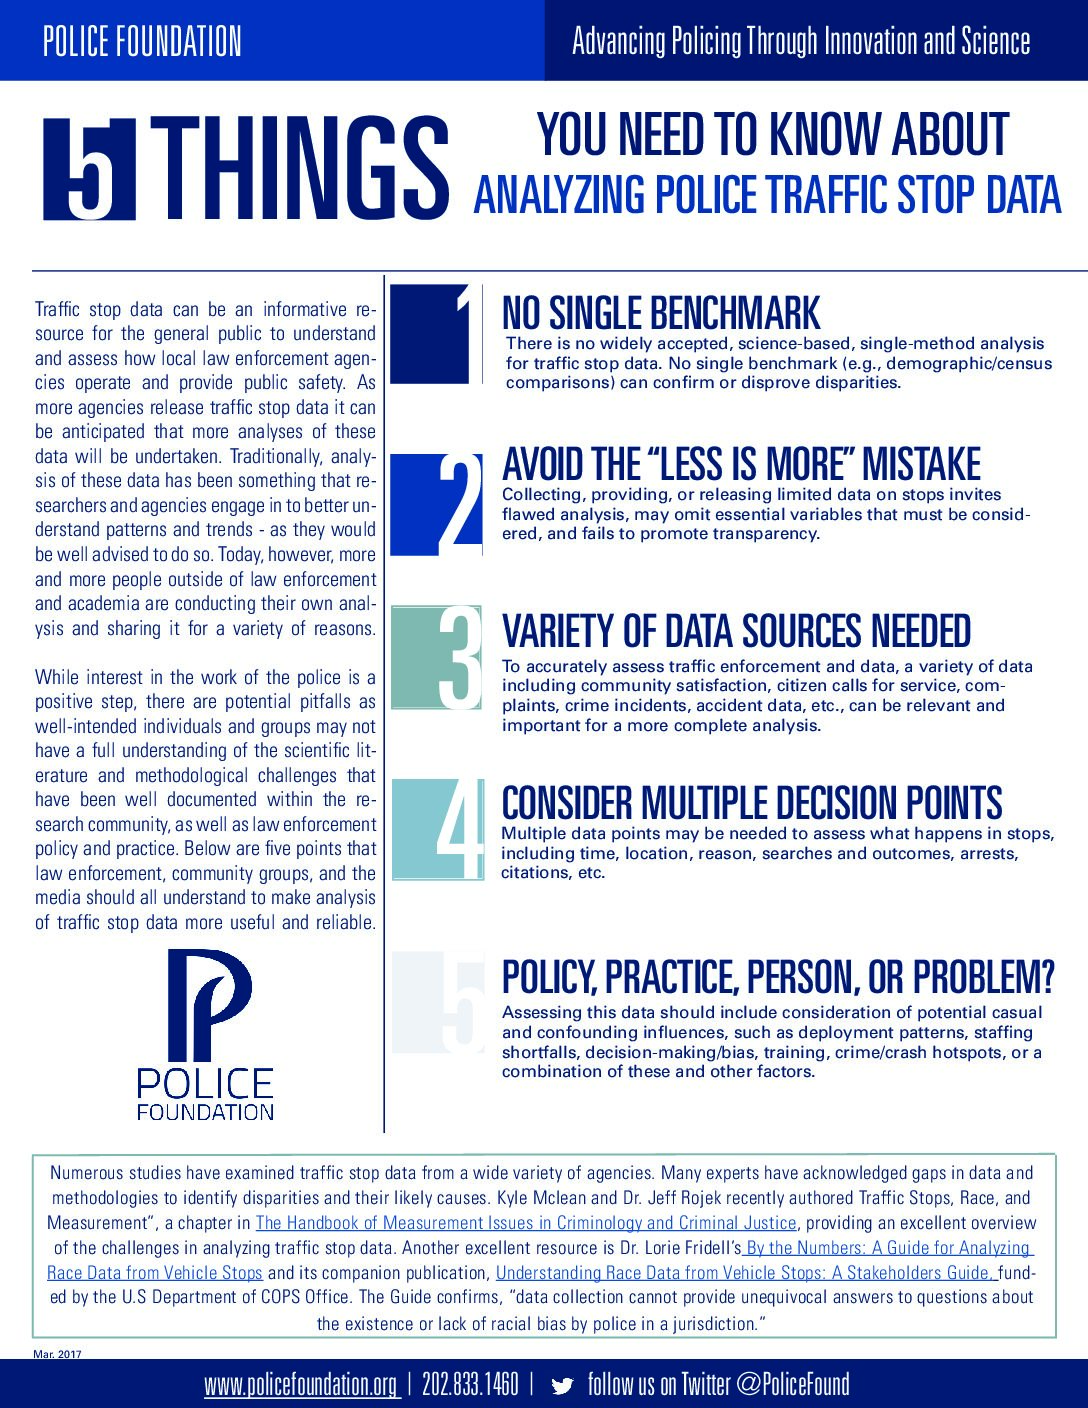 5 Things to Know About Traffic Stop Data